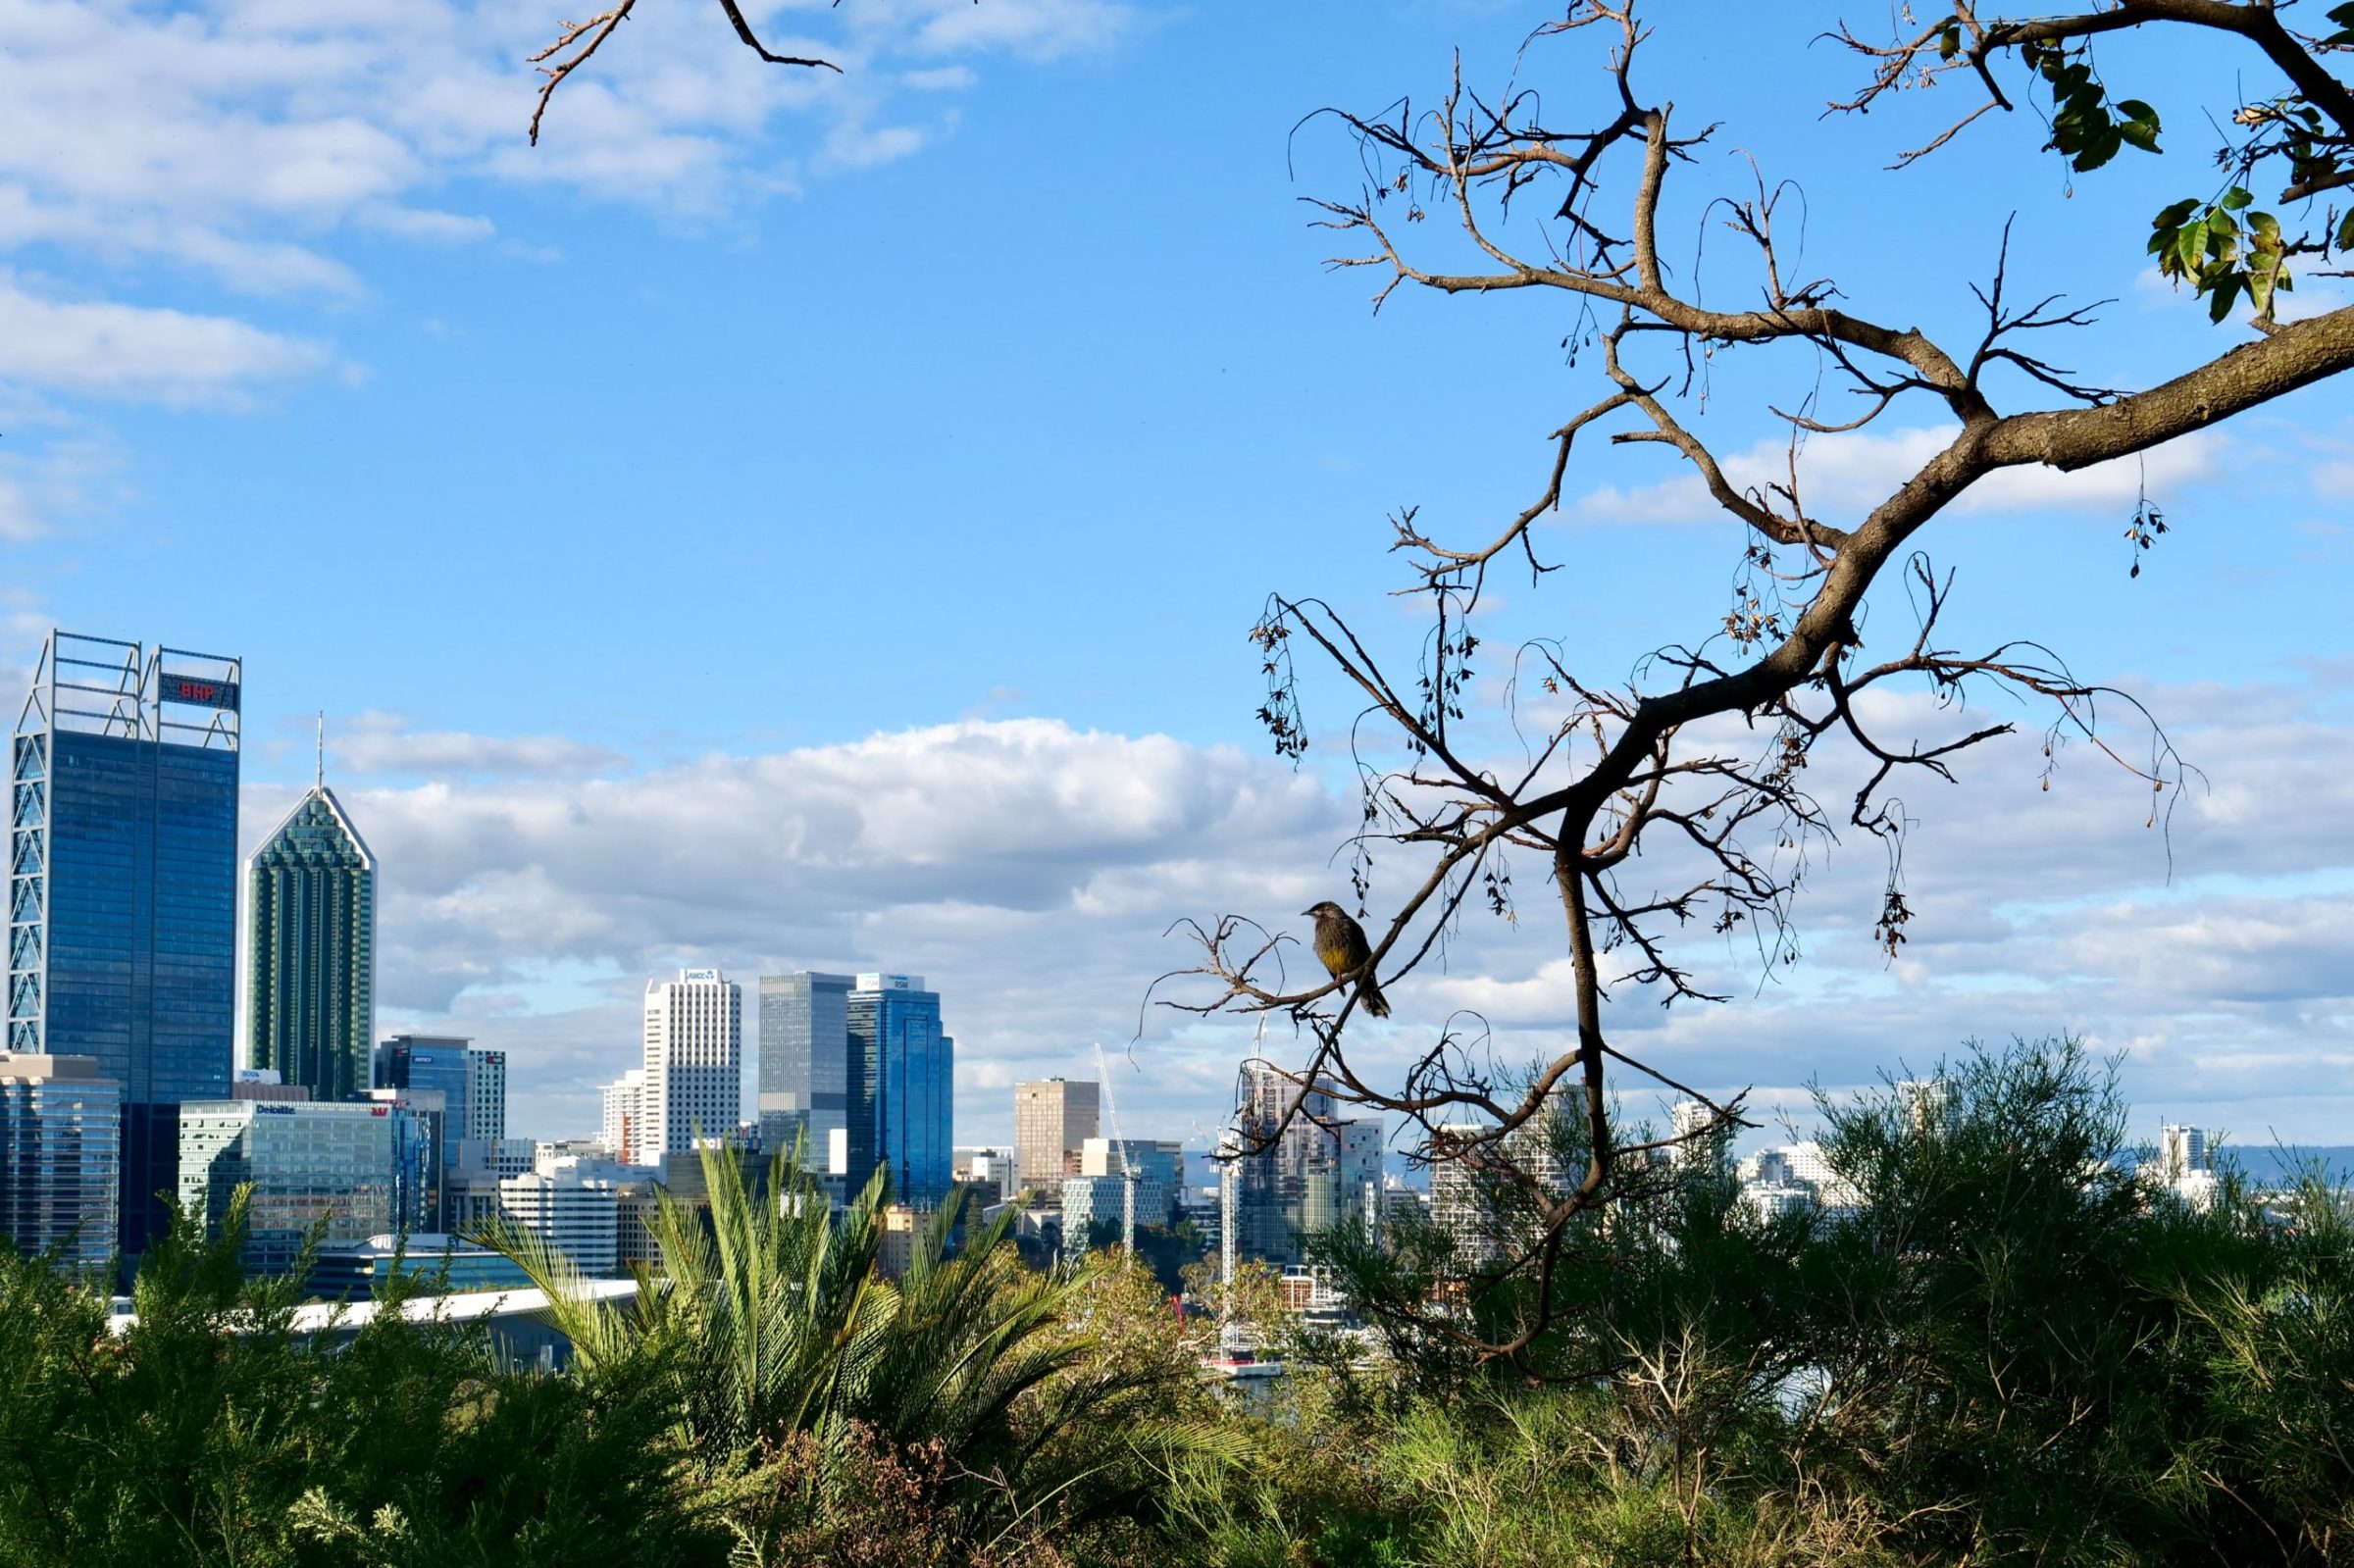 eastern half of Perth CBD, viewed from edge of Kings Park, 19.06.20. Copyright Doug Spencer.